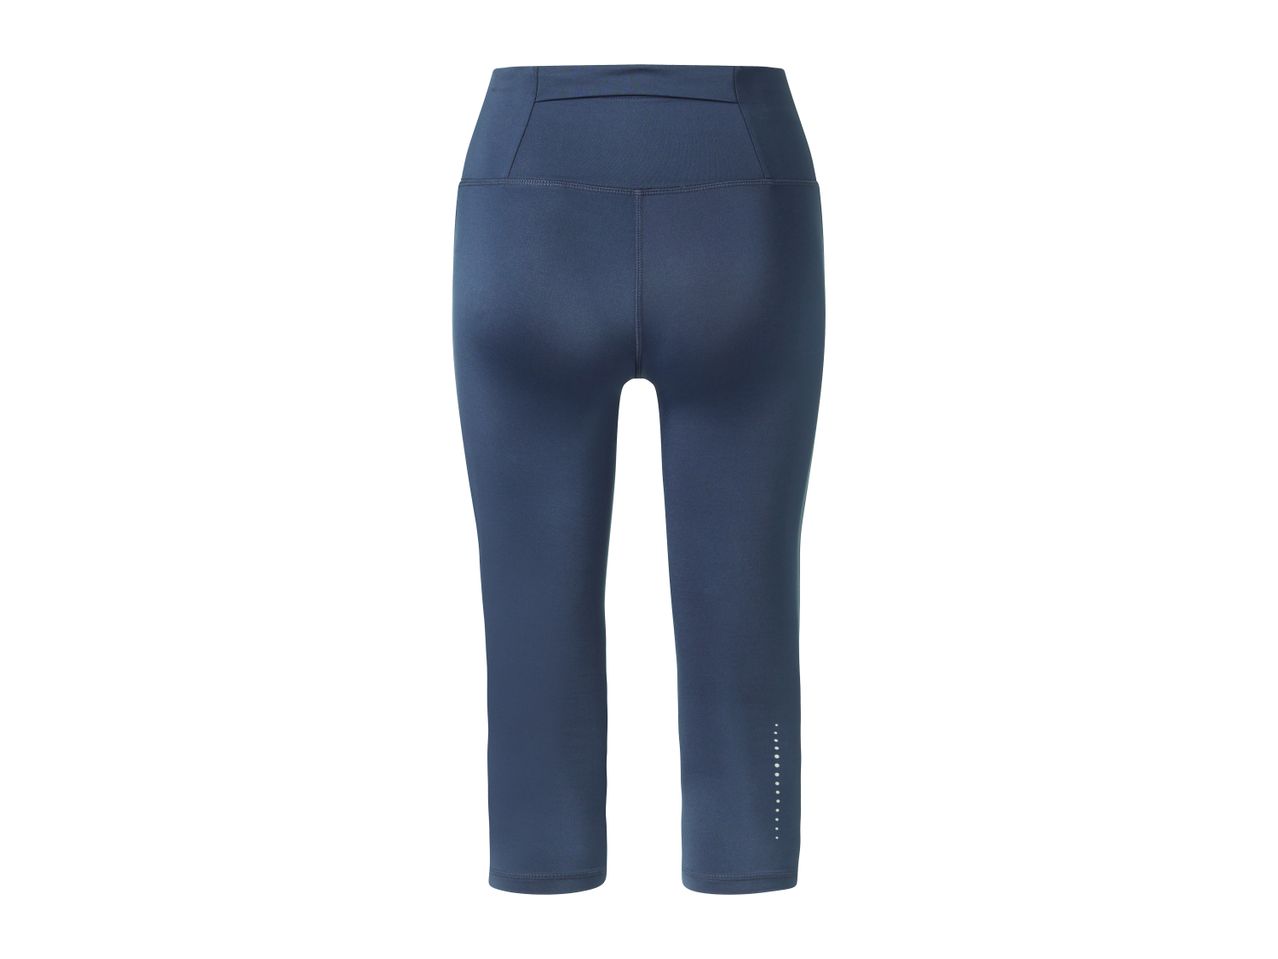 Go to full screen view: Crivit Ladies’ Cropped Sports Leggings - Image 12